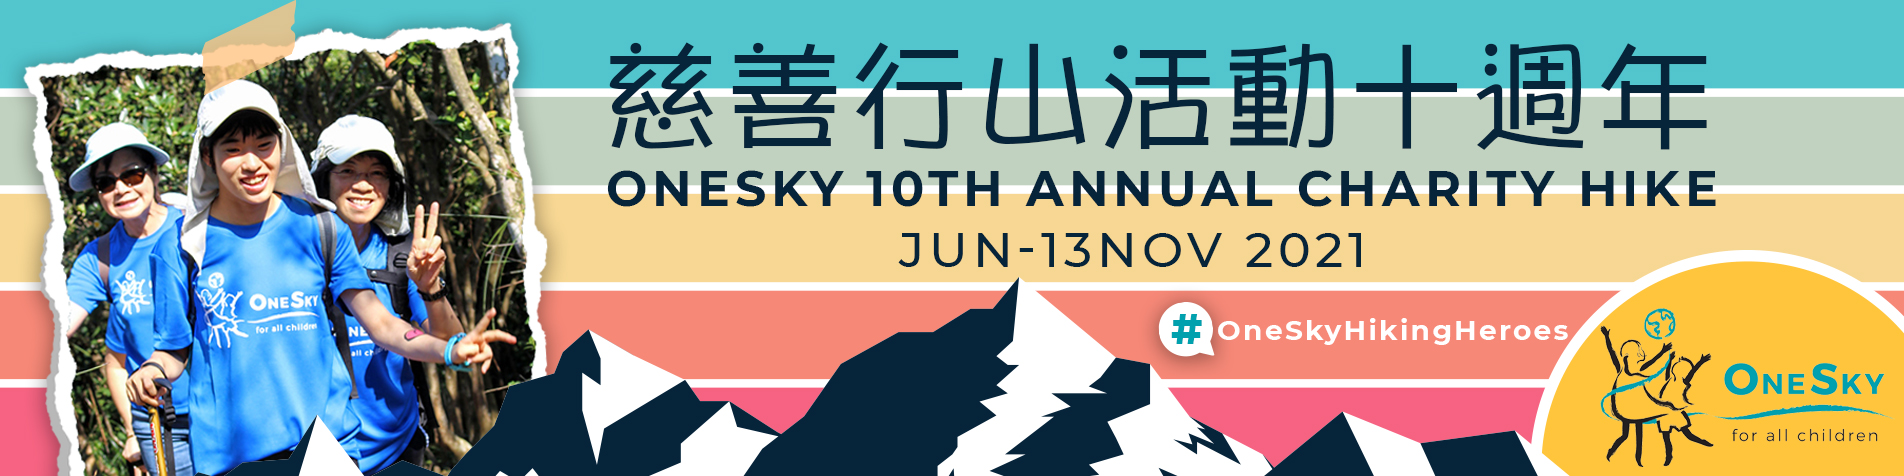 OneSky 10th Annual Charity Hike